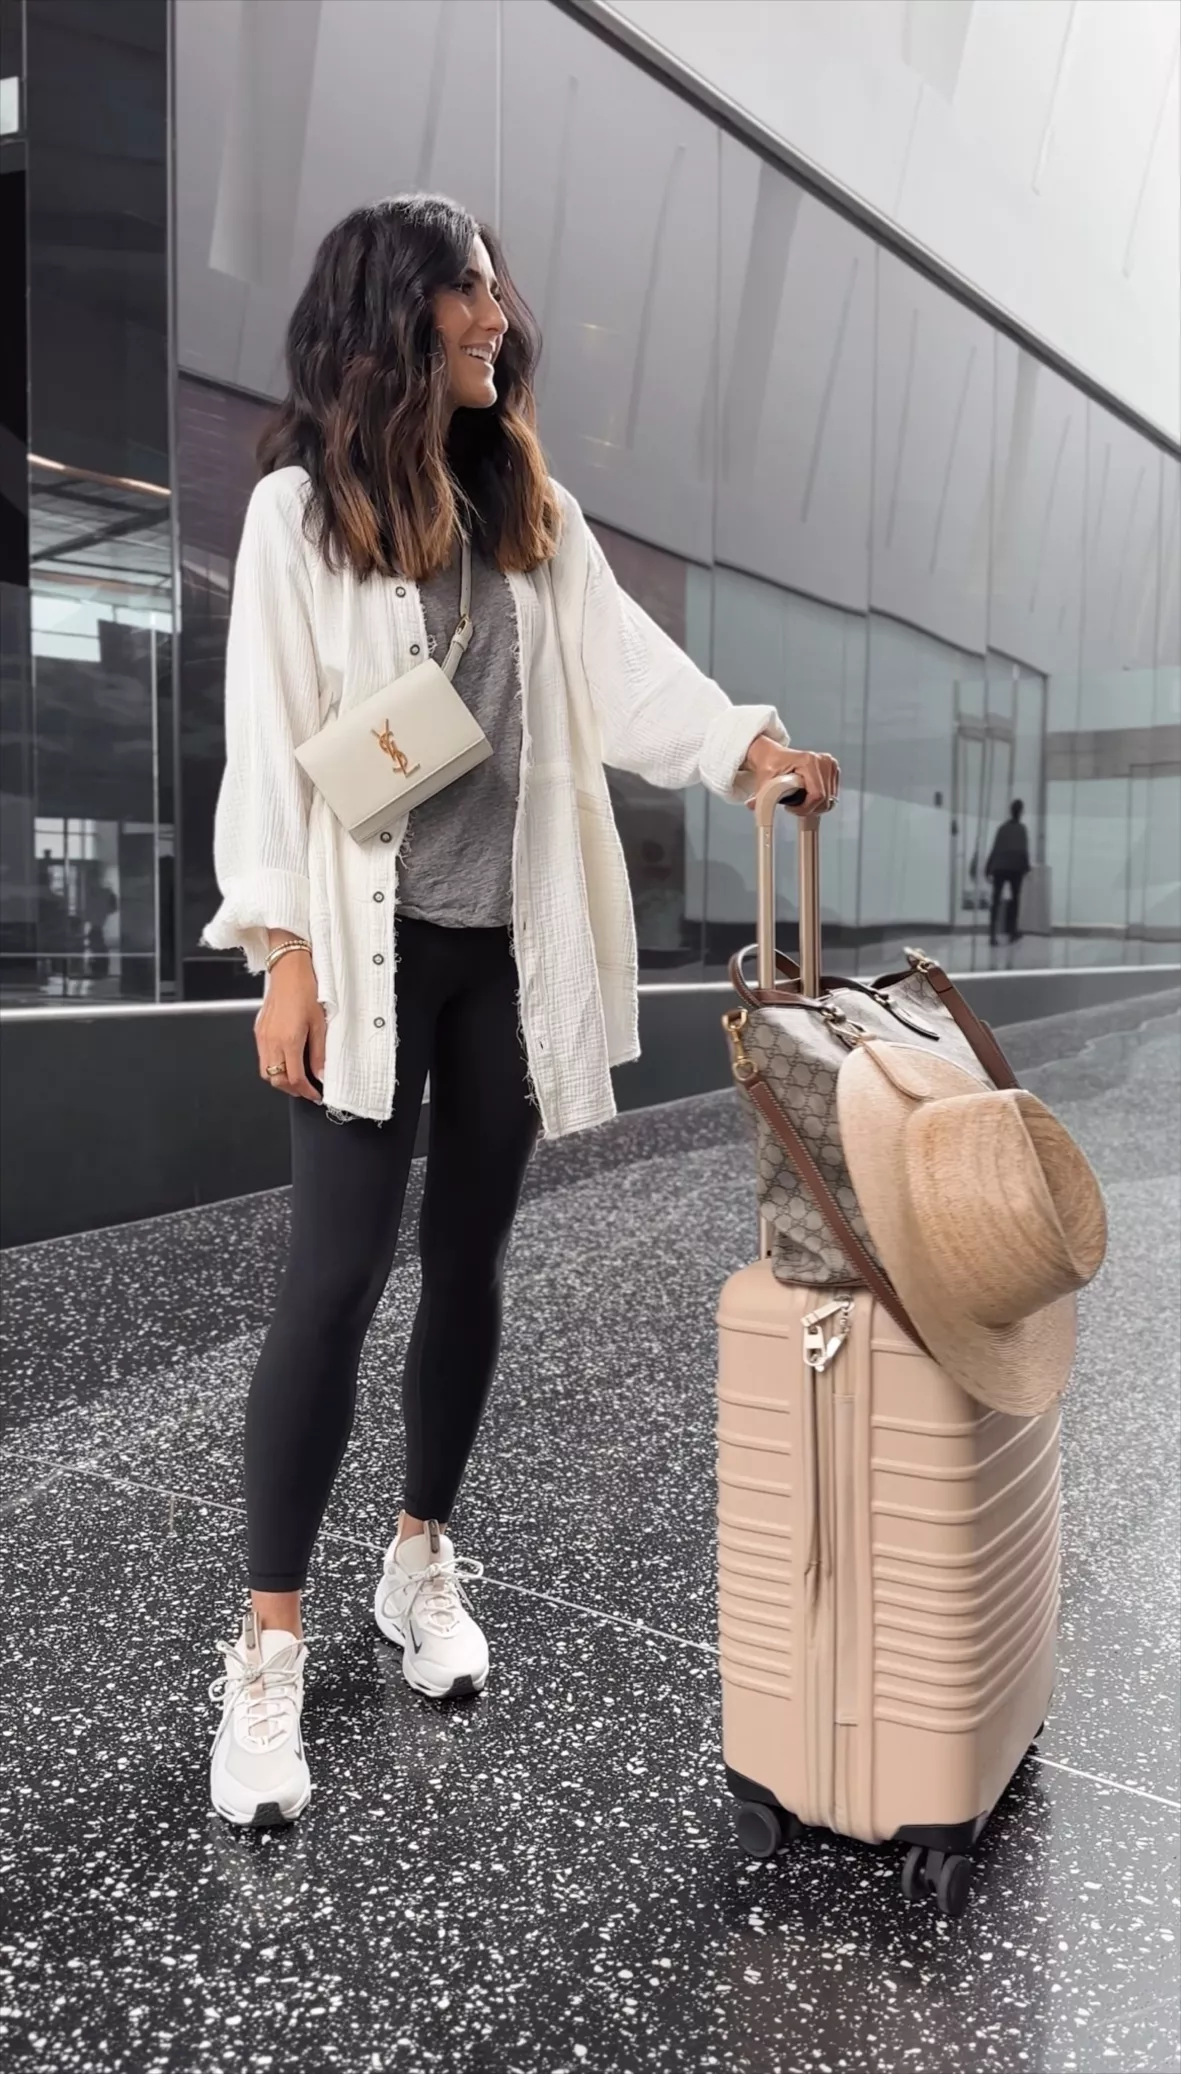 AIRPORT & TRAVEL OUTFIT IDEAS 2020 